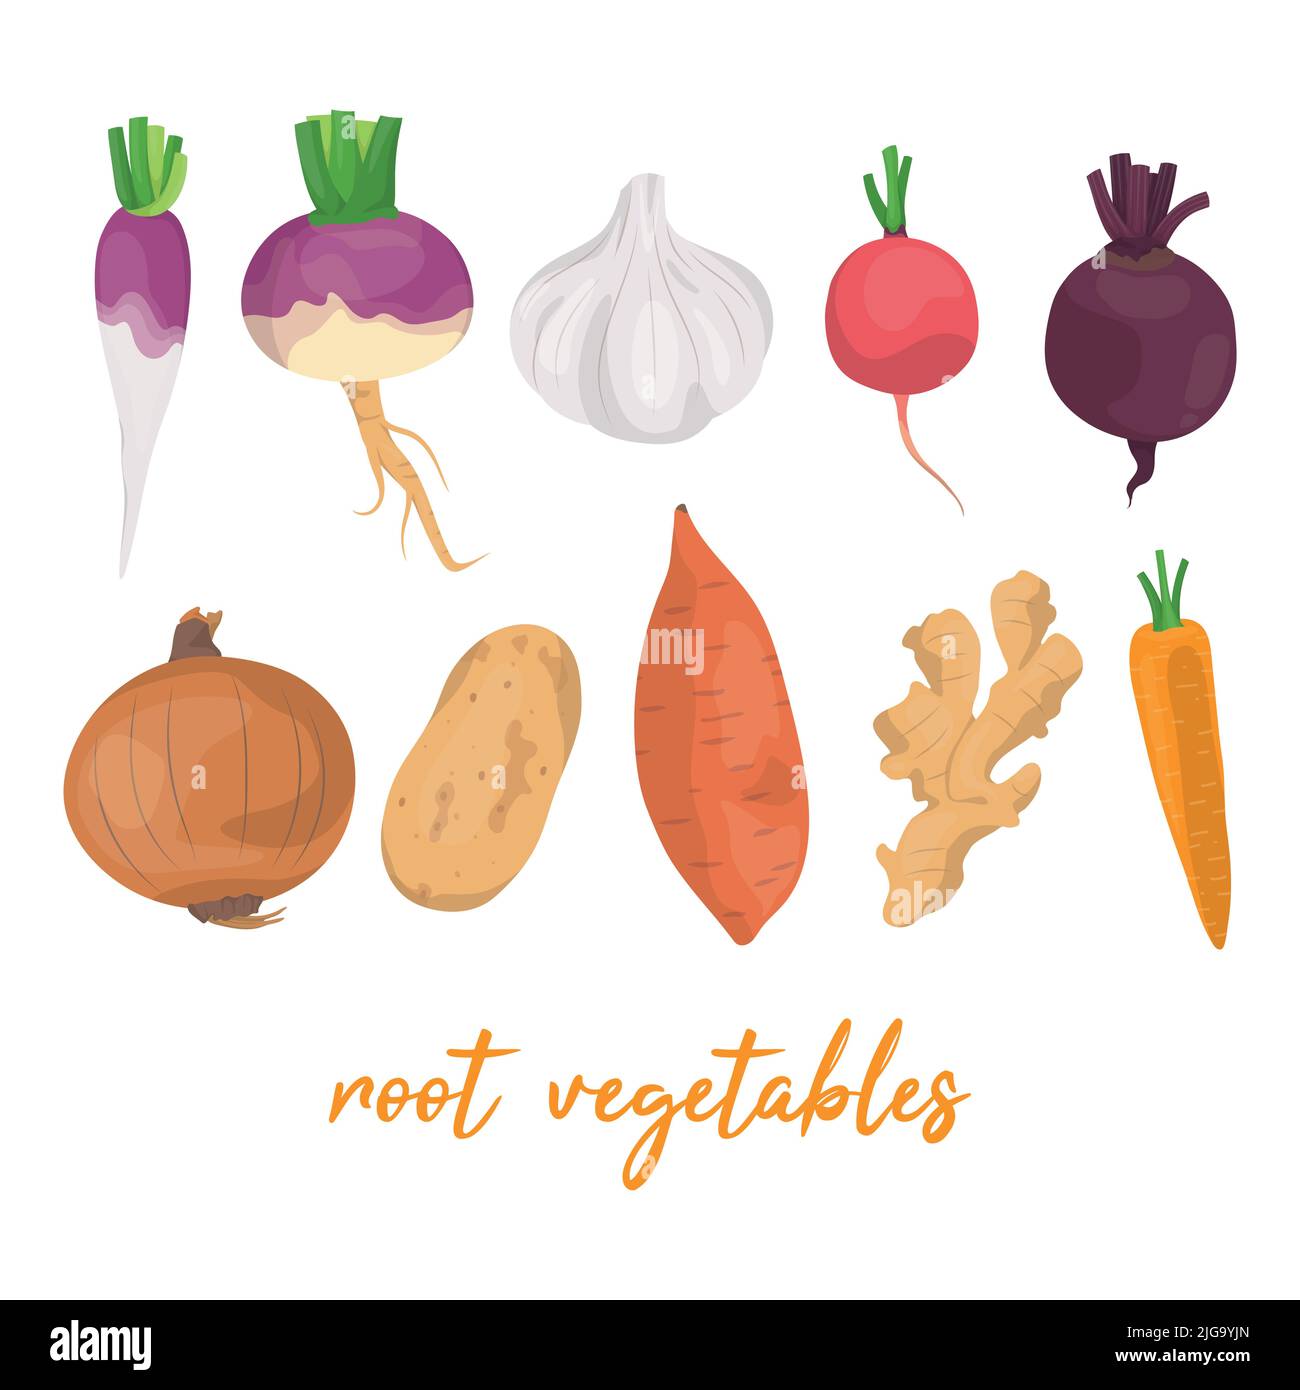 Collection of various hand drawn, colorful root vegetables, isolated on a white background. Stock Vector